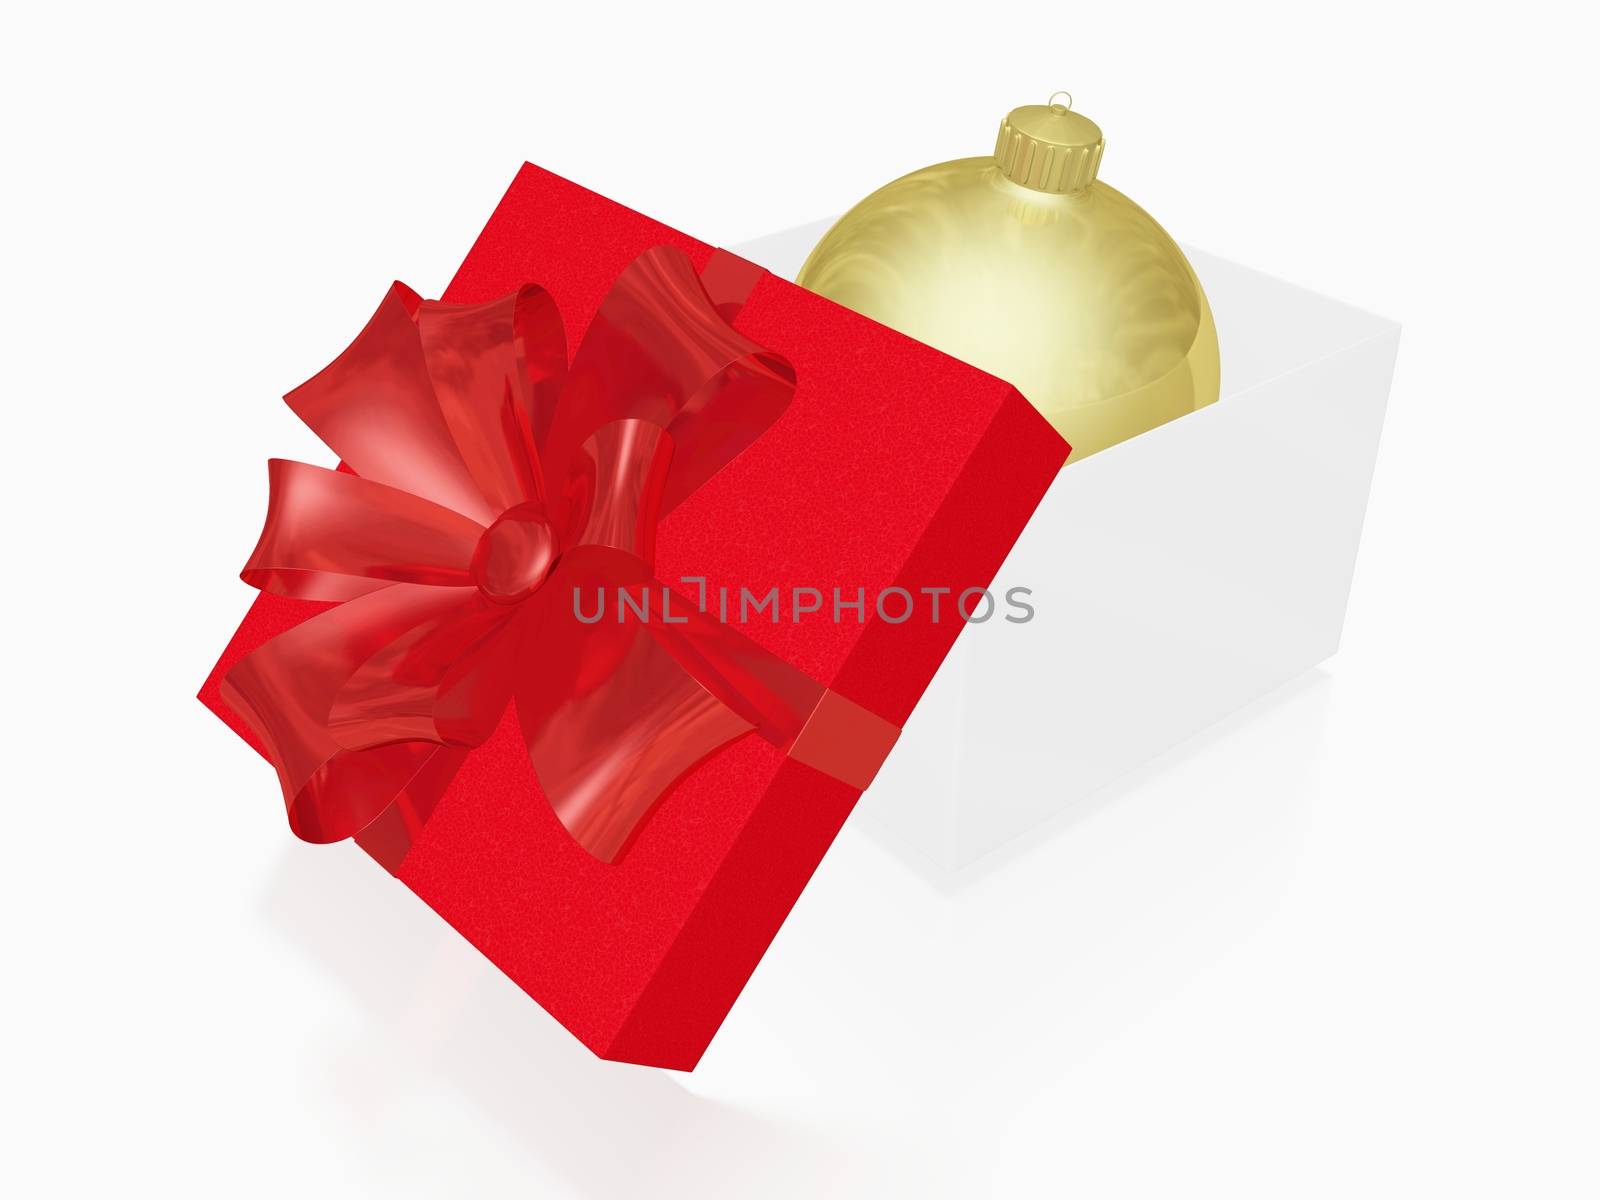 Golden Christmas Bauble Ball in Gift Box by RichieThakur